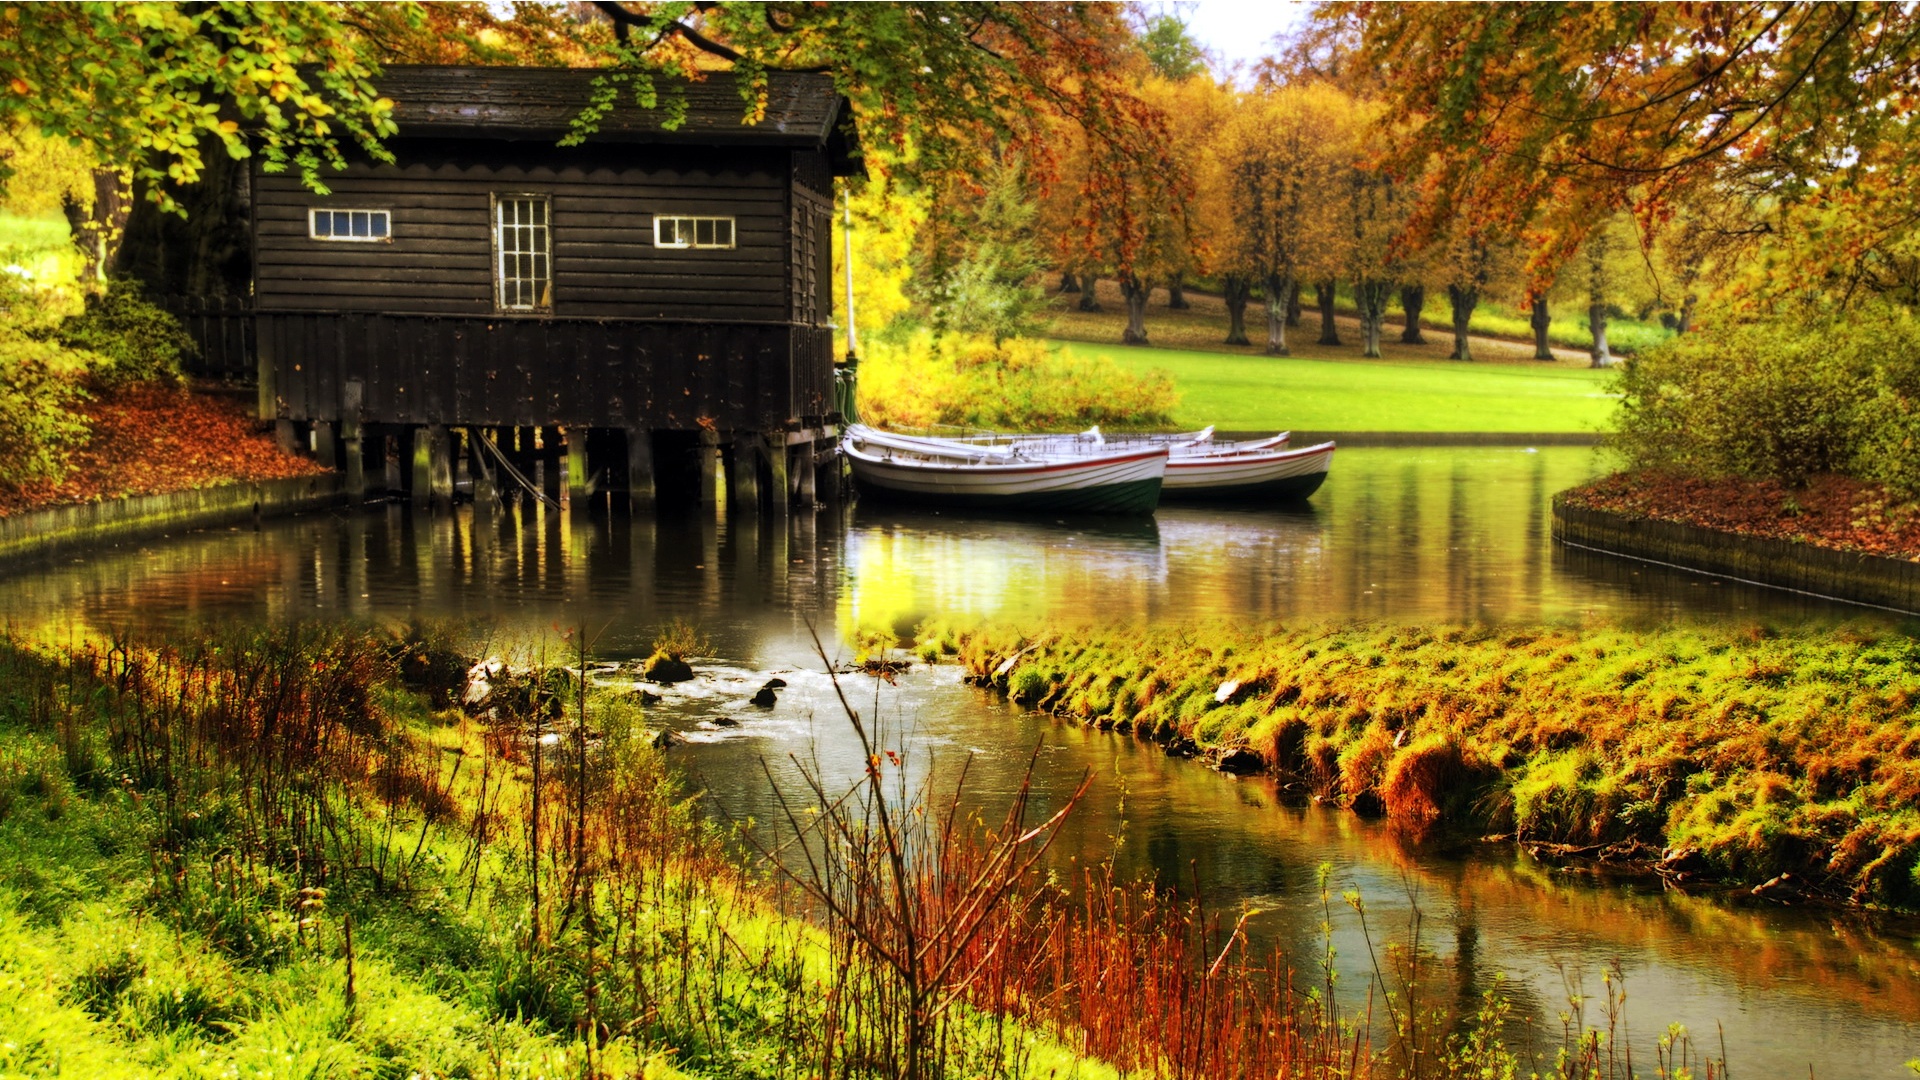  boat house nature wallpapers share this nature background on facebook